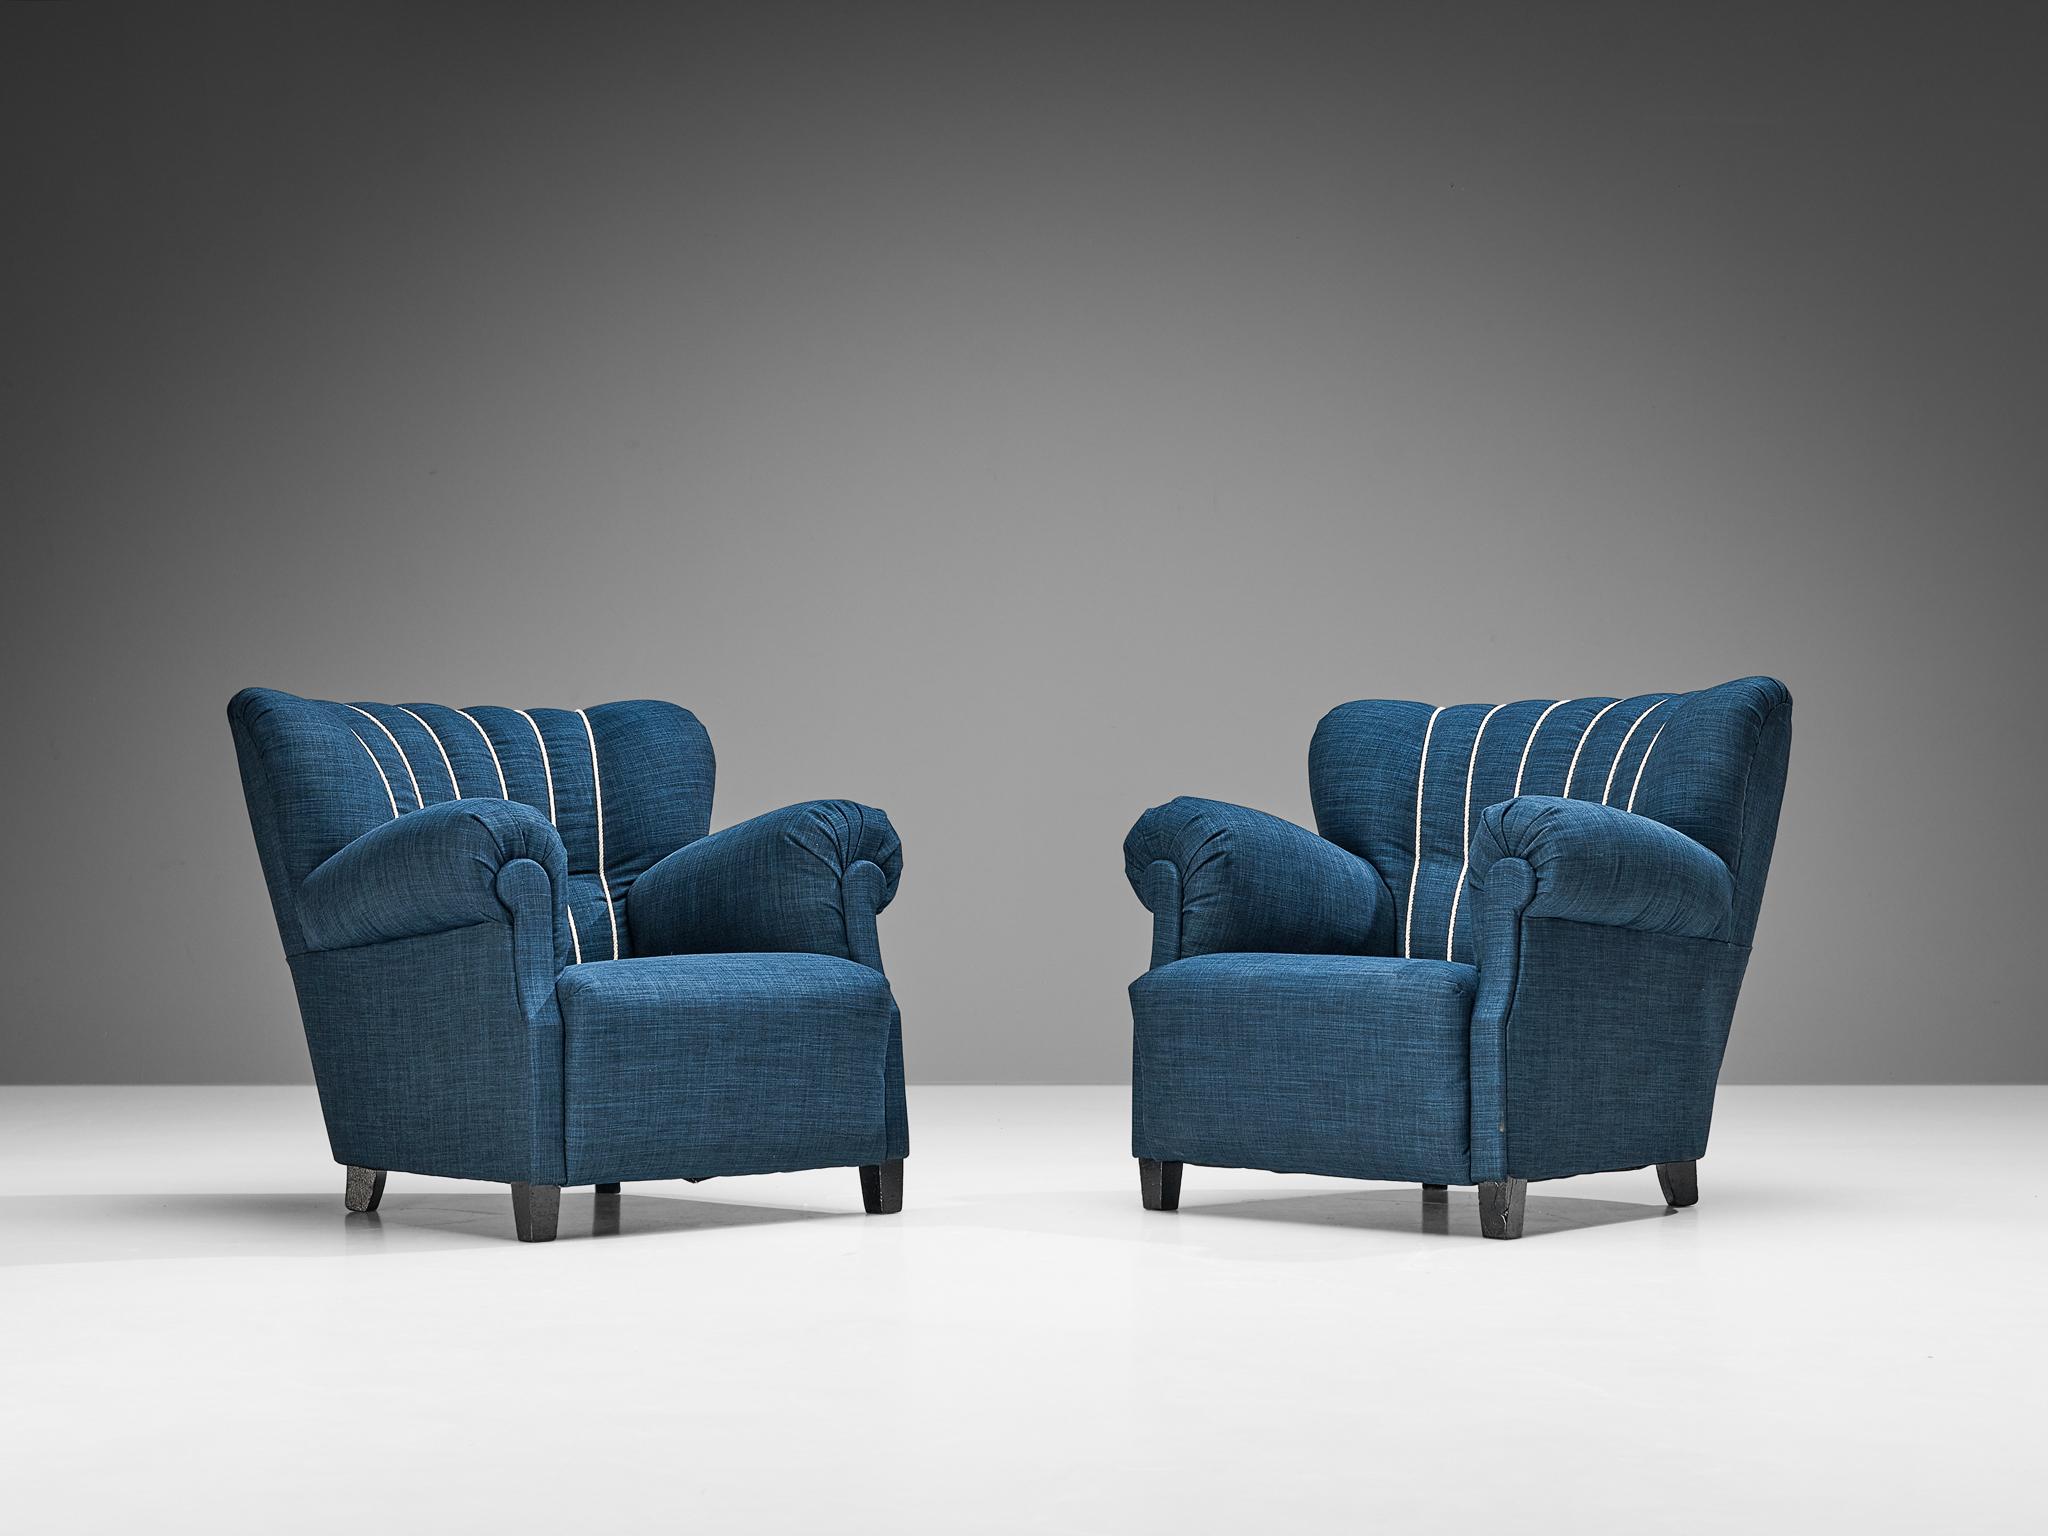 Pair of lounge chairs, wood and blue upholstery, Europe, 1940s

This fine pair of lounge chairs undoubtedly breathes the late art deco period of the 1940s. The design has a certain theatrical aesthetic with curved armrests flowing slightly outwards.